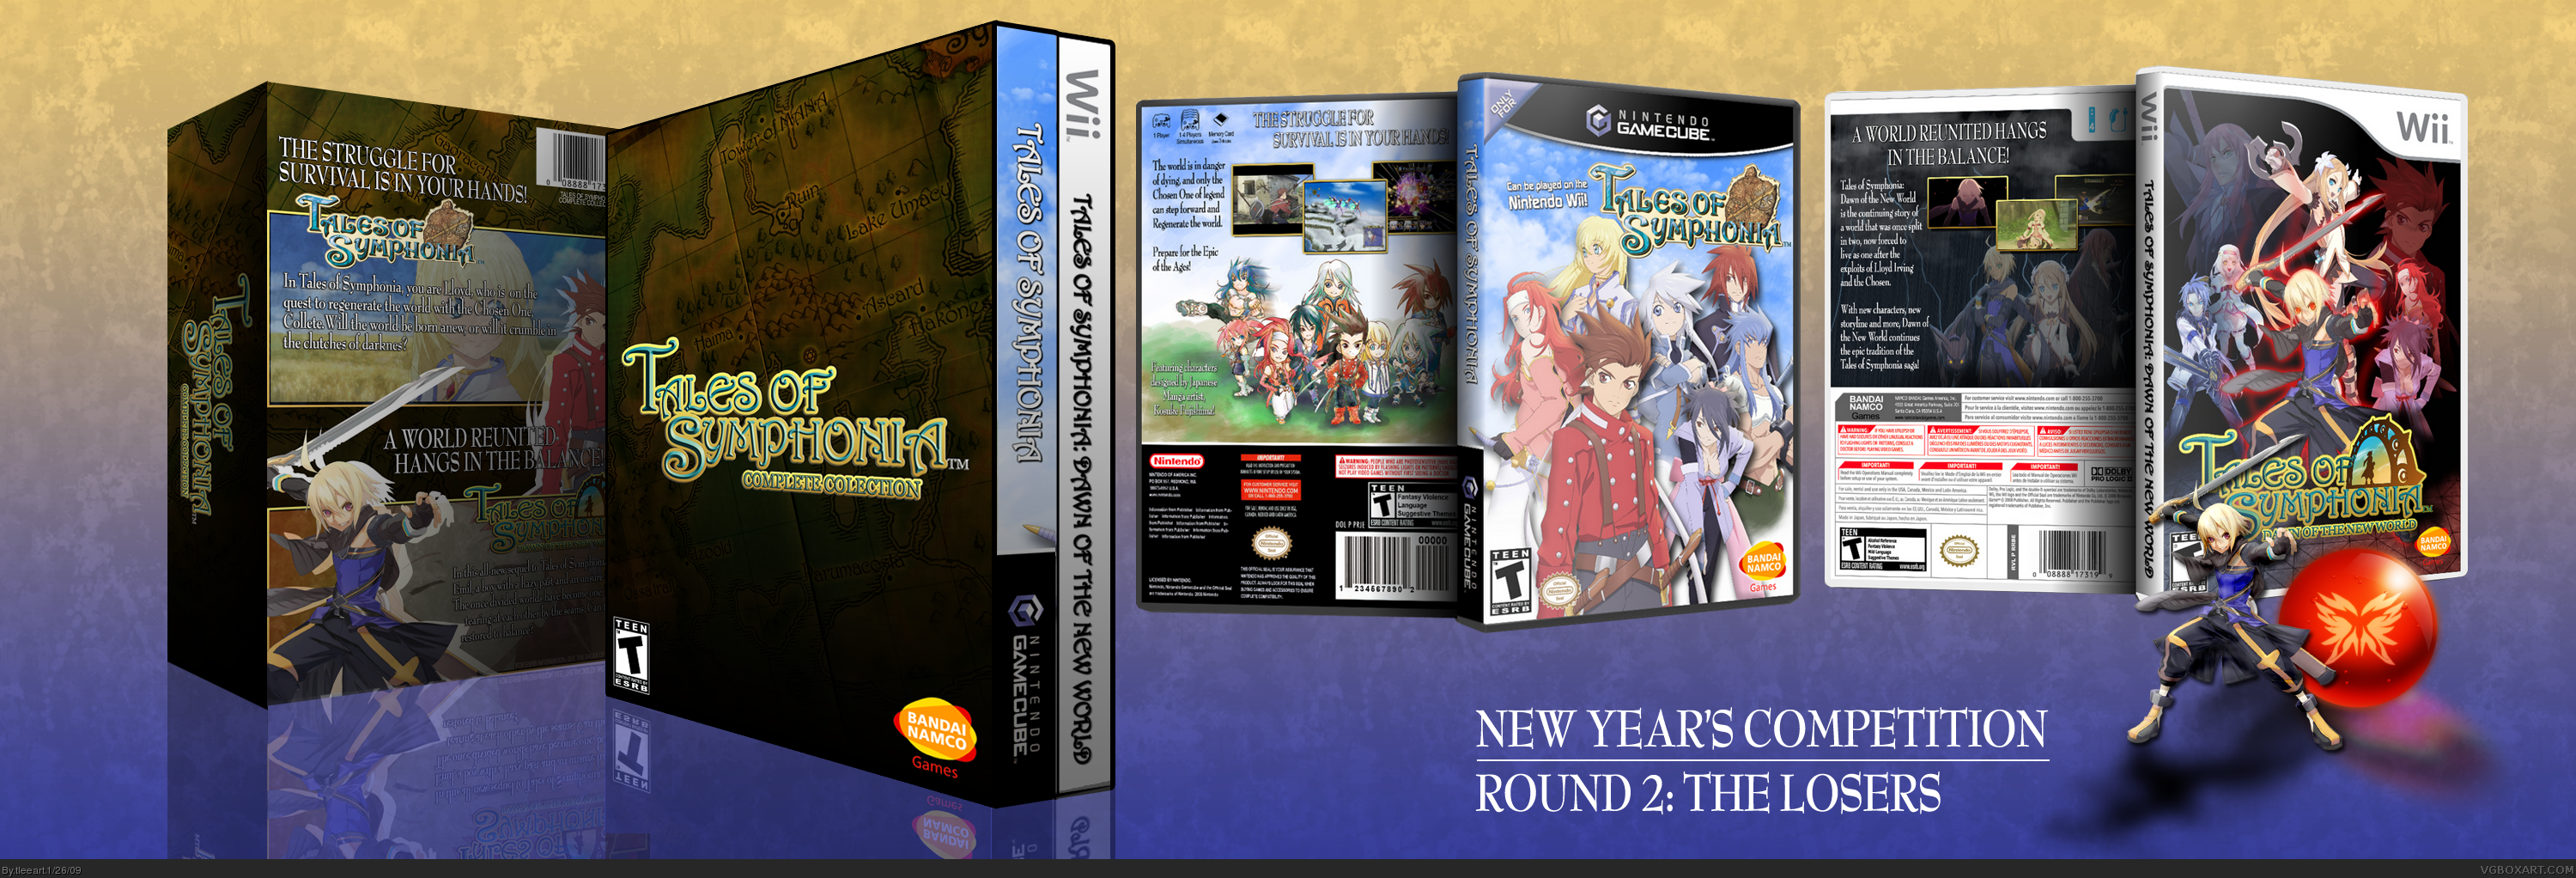 Tales of Symphonia: Complete Collection box cover